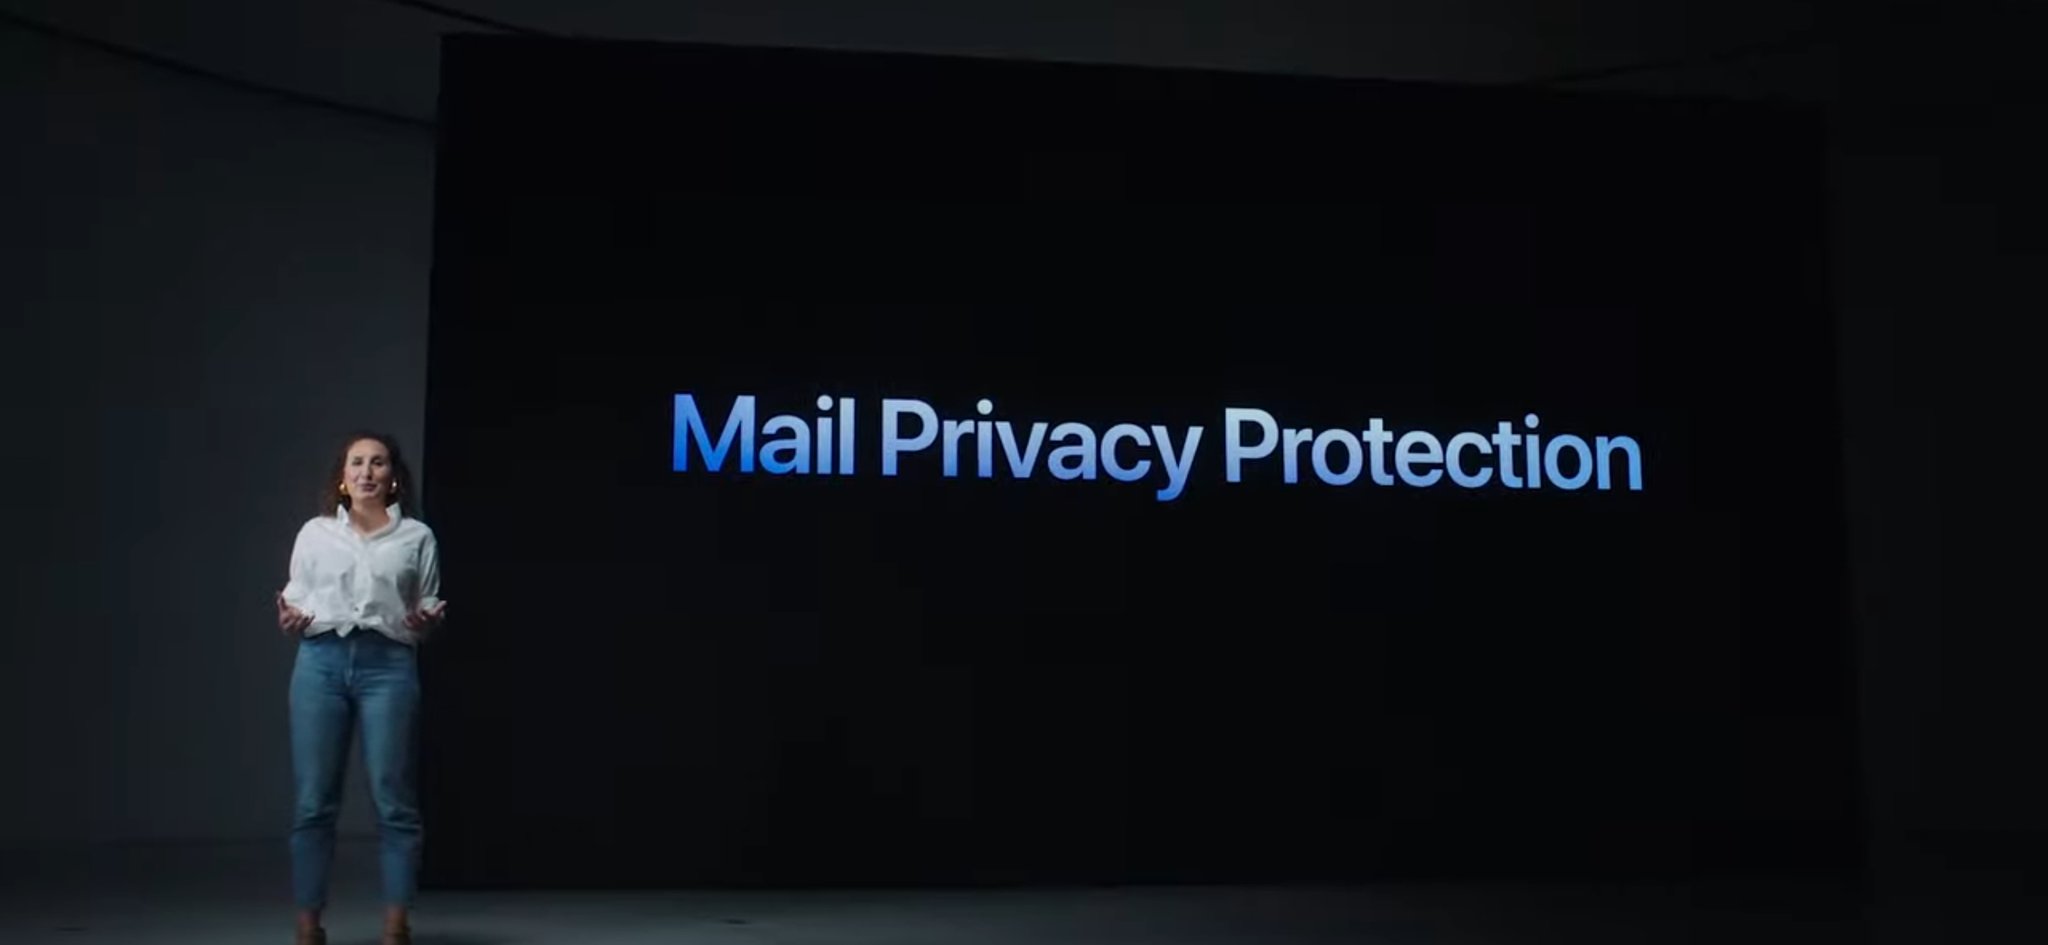 Apple boosts email privacy, hurts newsletters, with new Mail Privacy Protection feature